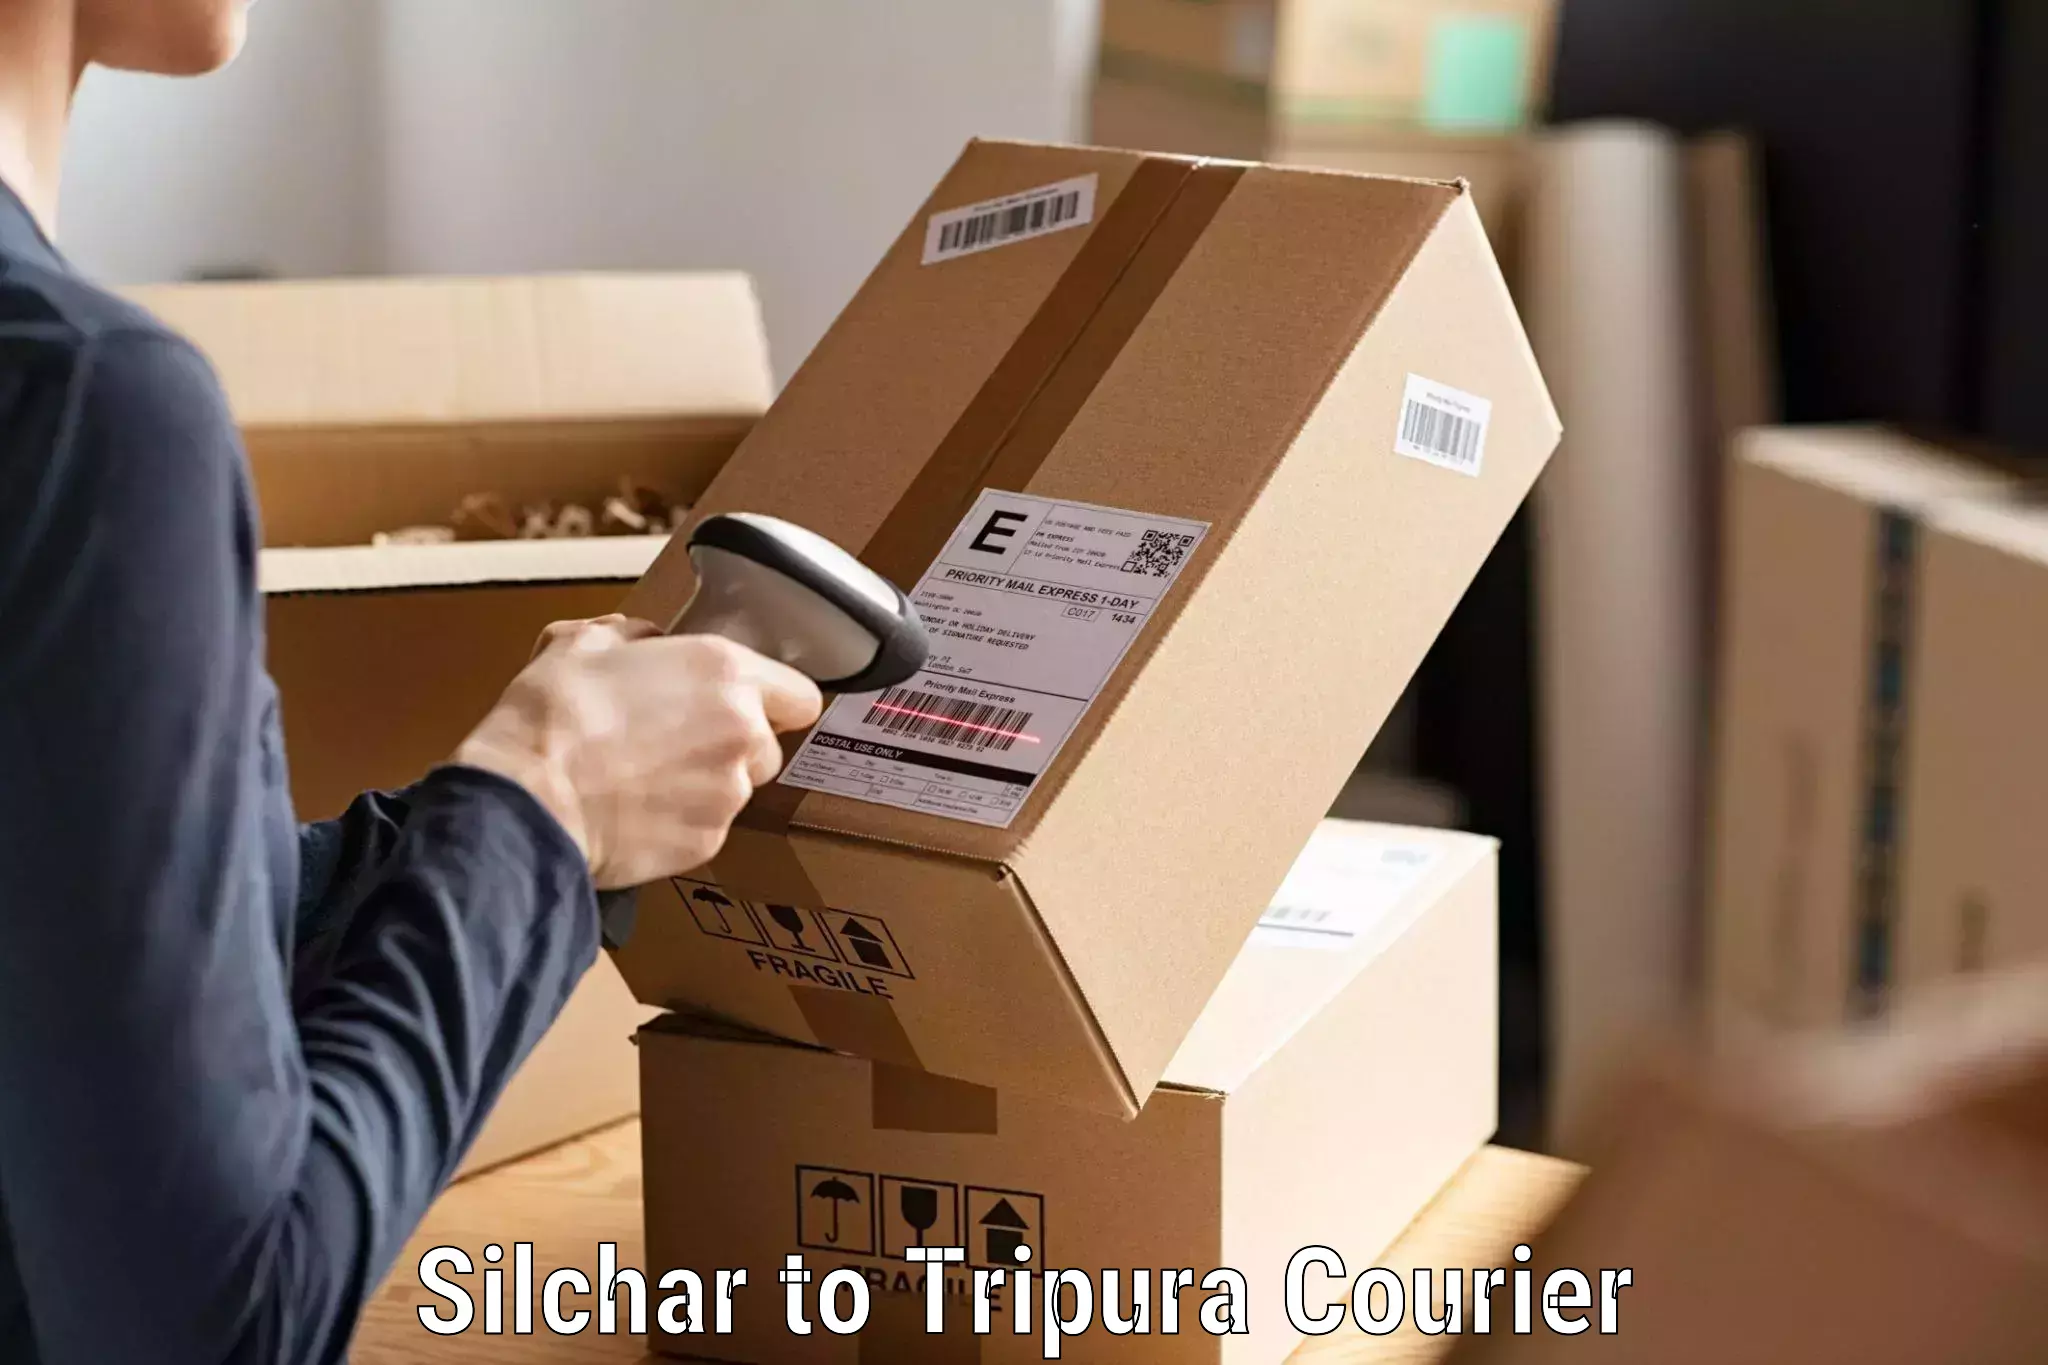 Supply chain delivery Silchar to Udaipur Tripura